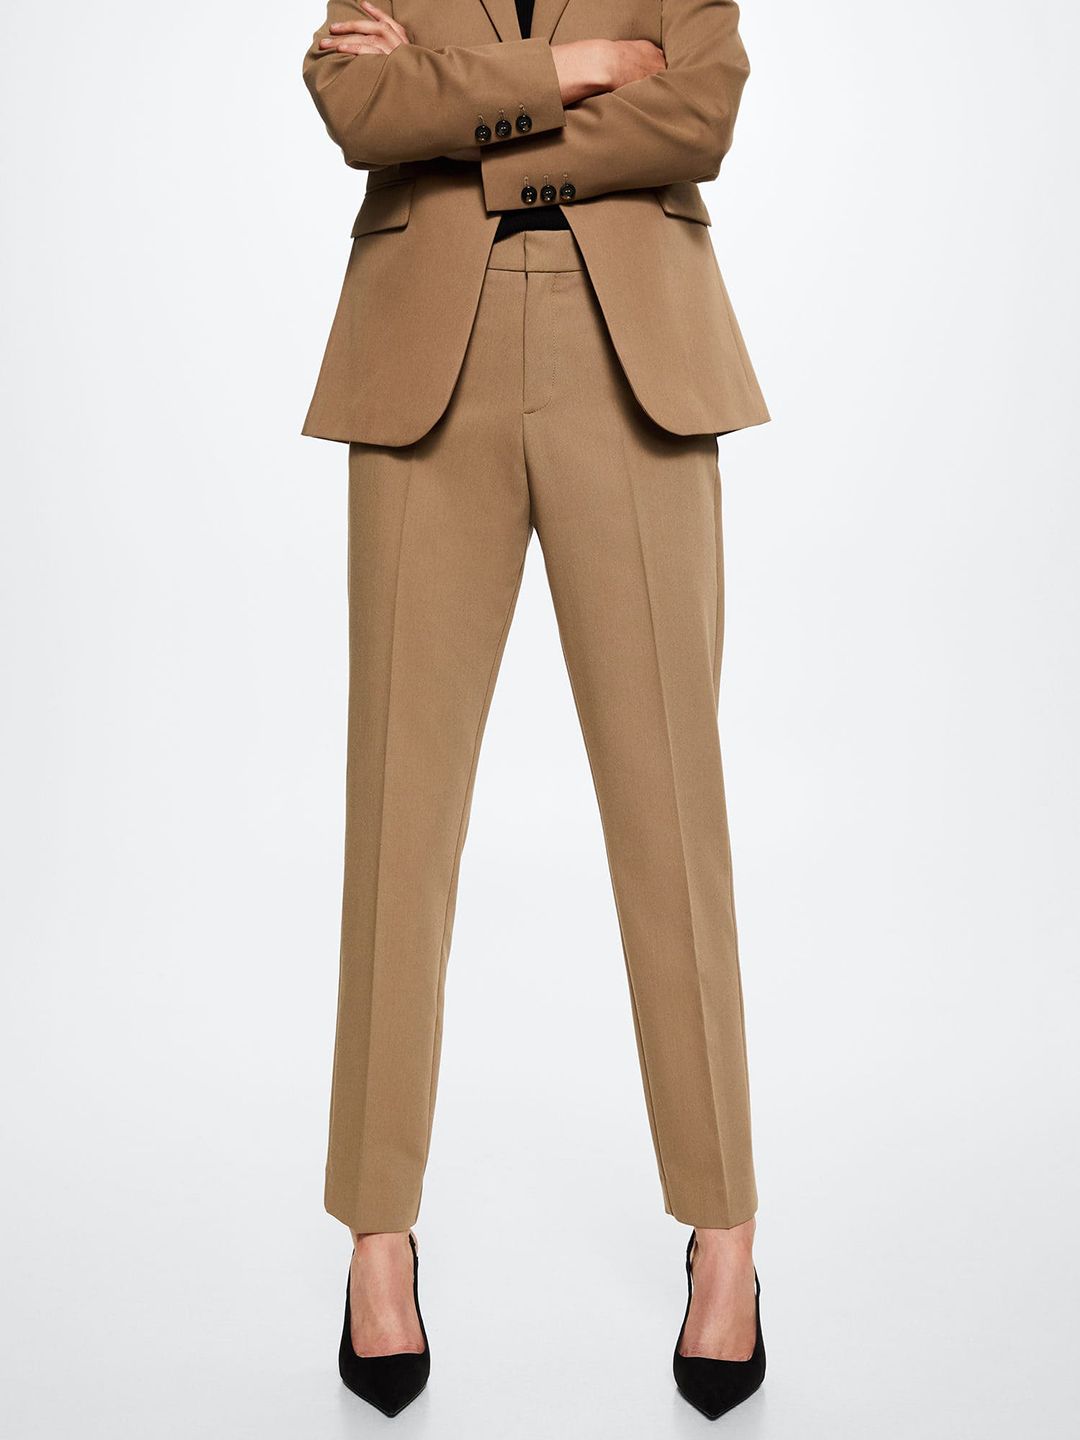 MANGO Women Beige Solid Slim Fit Trousers Price in India